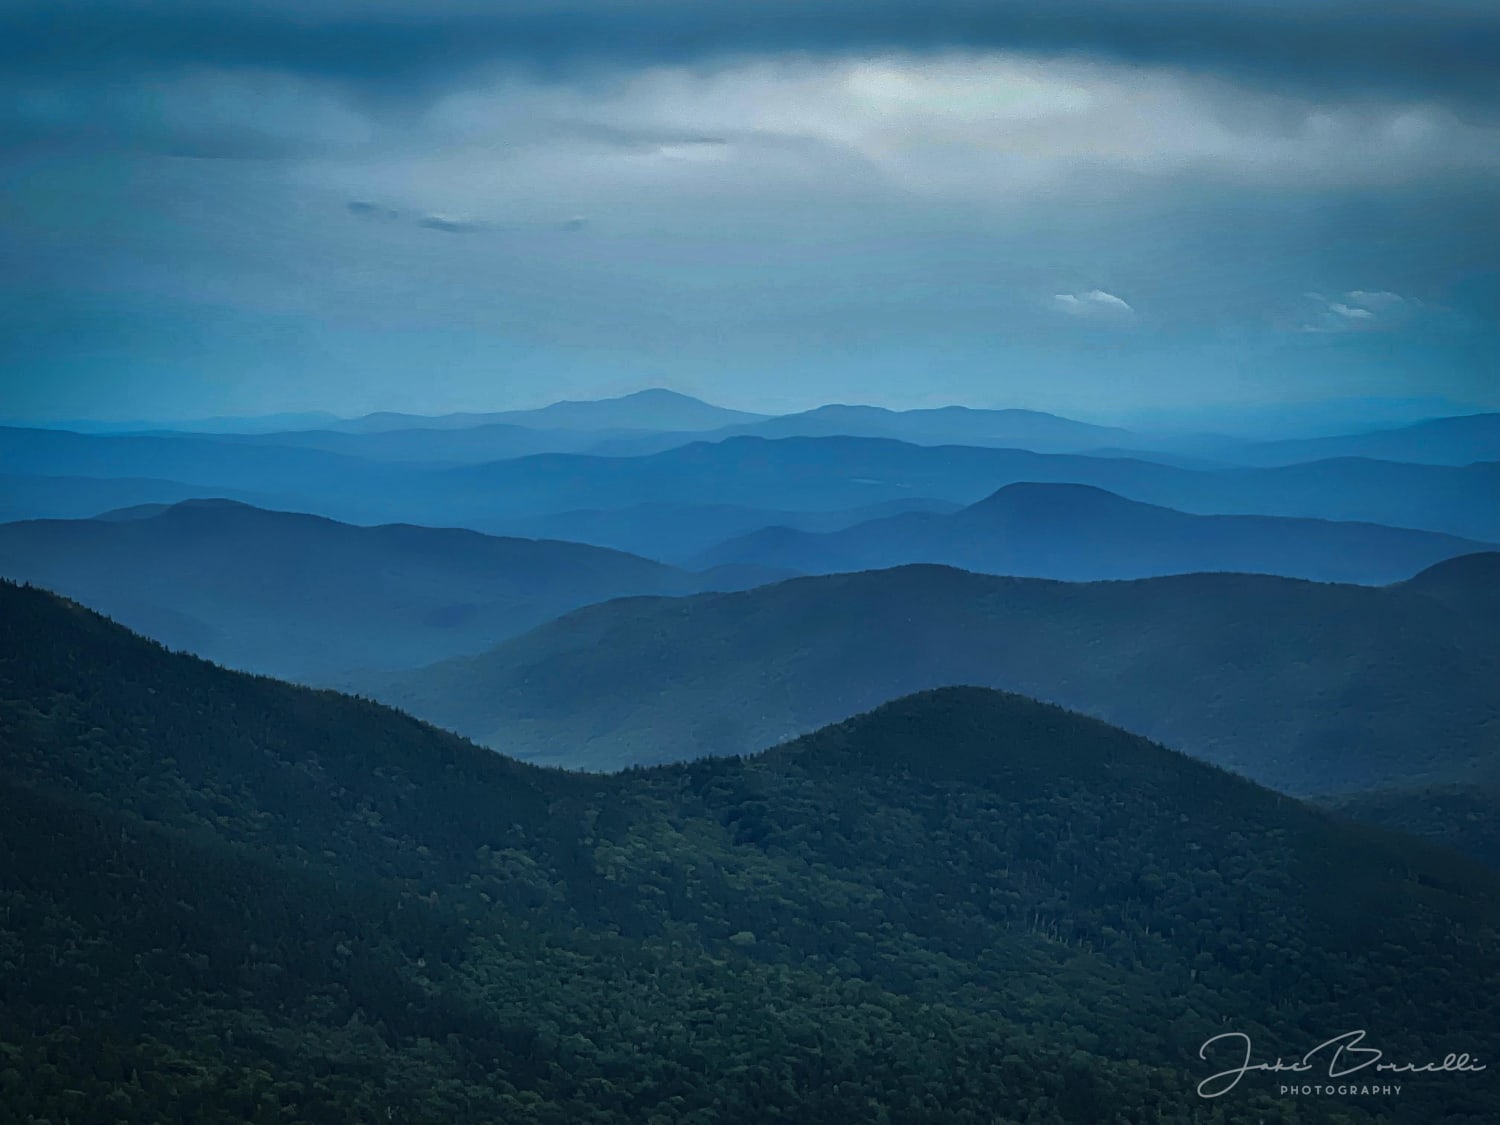 Waves - From Jennings Peak in The White Mountains, New Hampshire